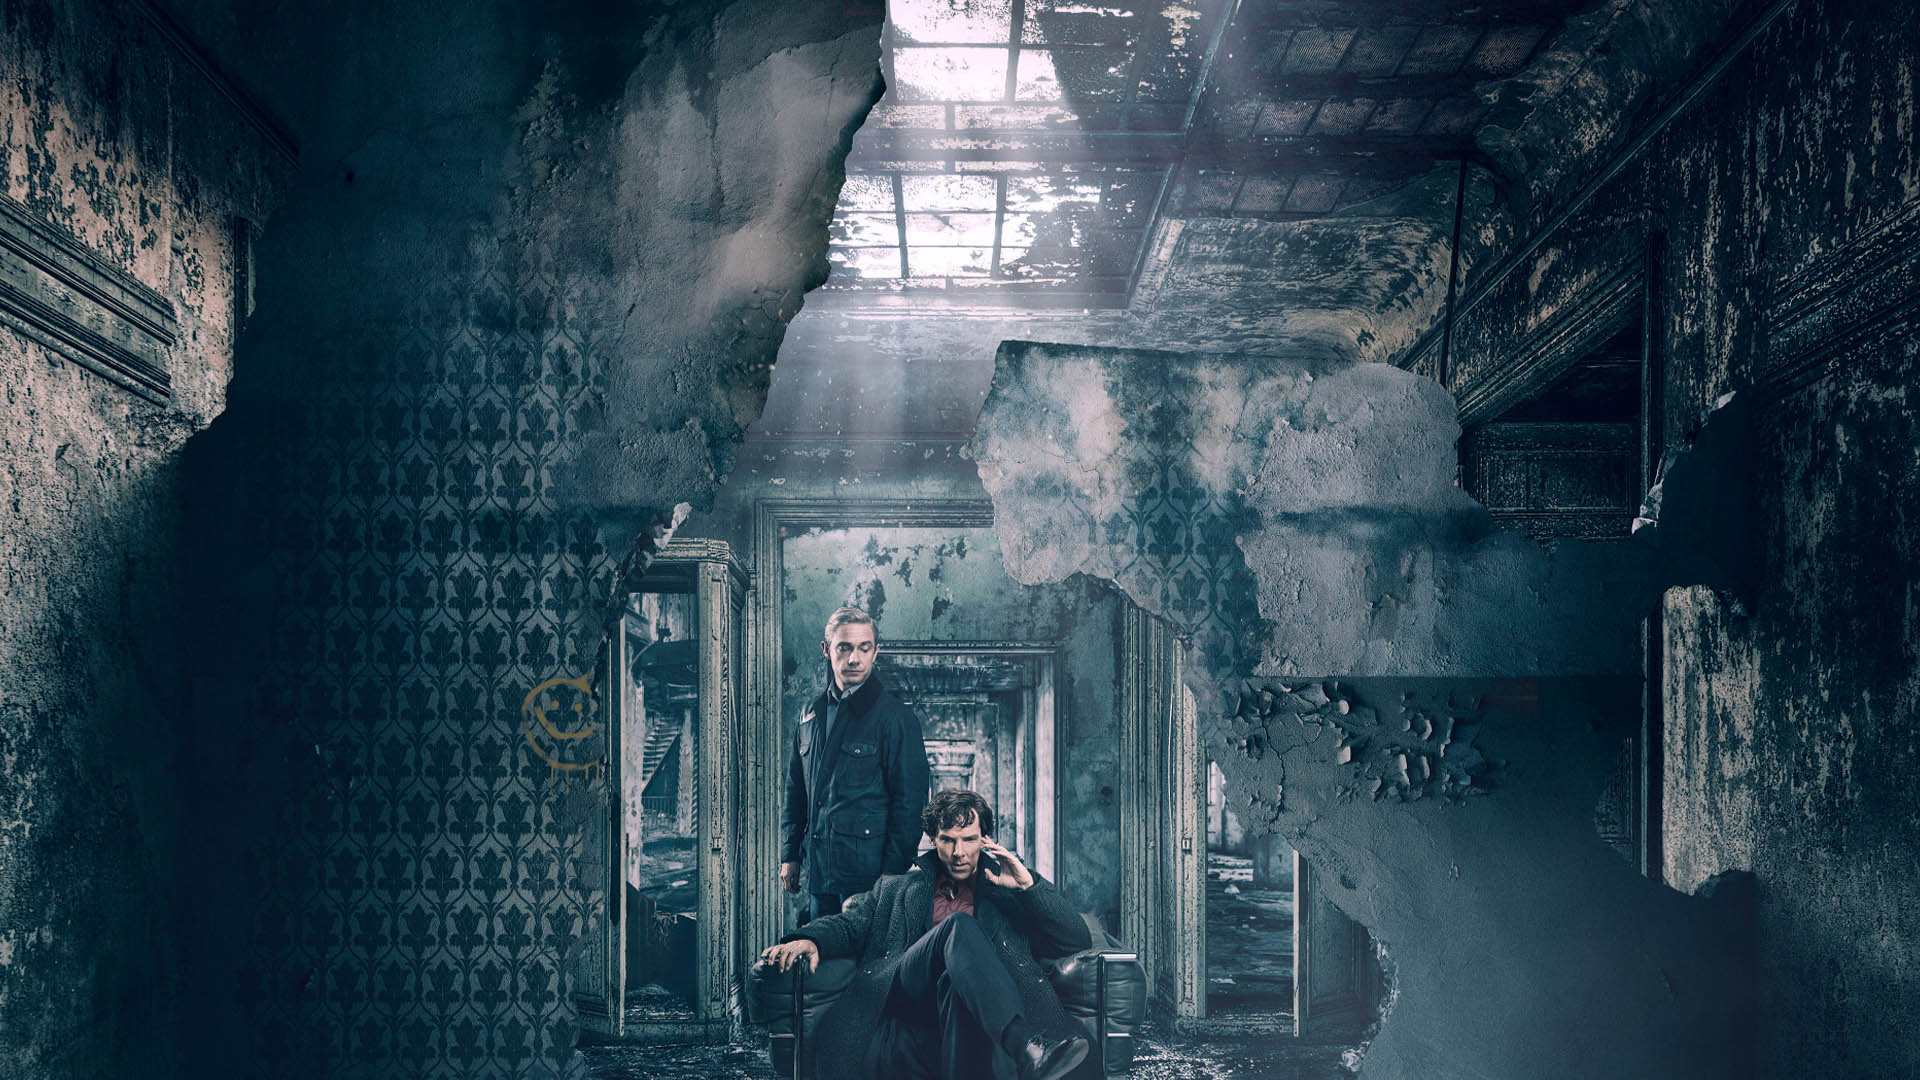 Sherlock Holmes and Dr. Watson in a dilapidated house in the Sherlock series